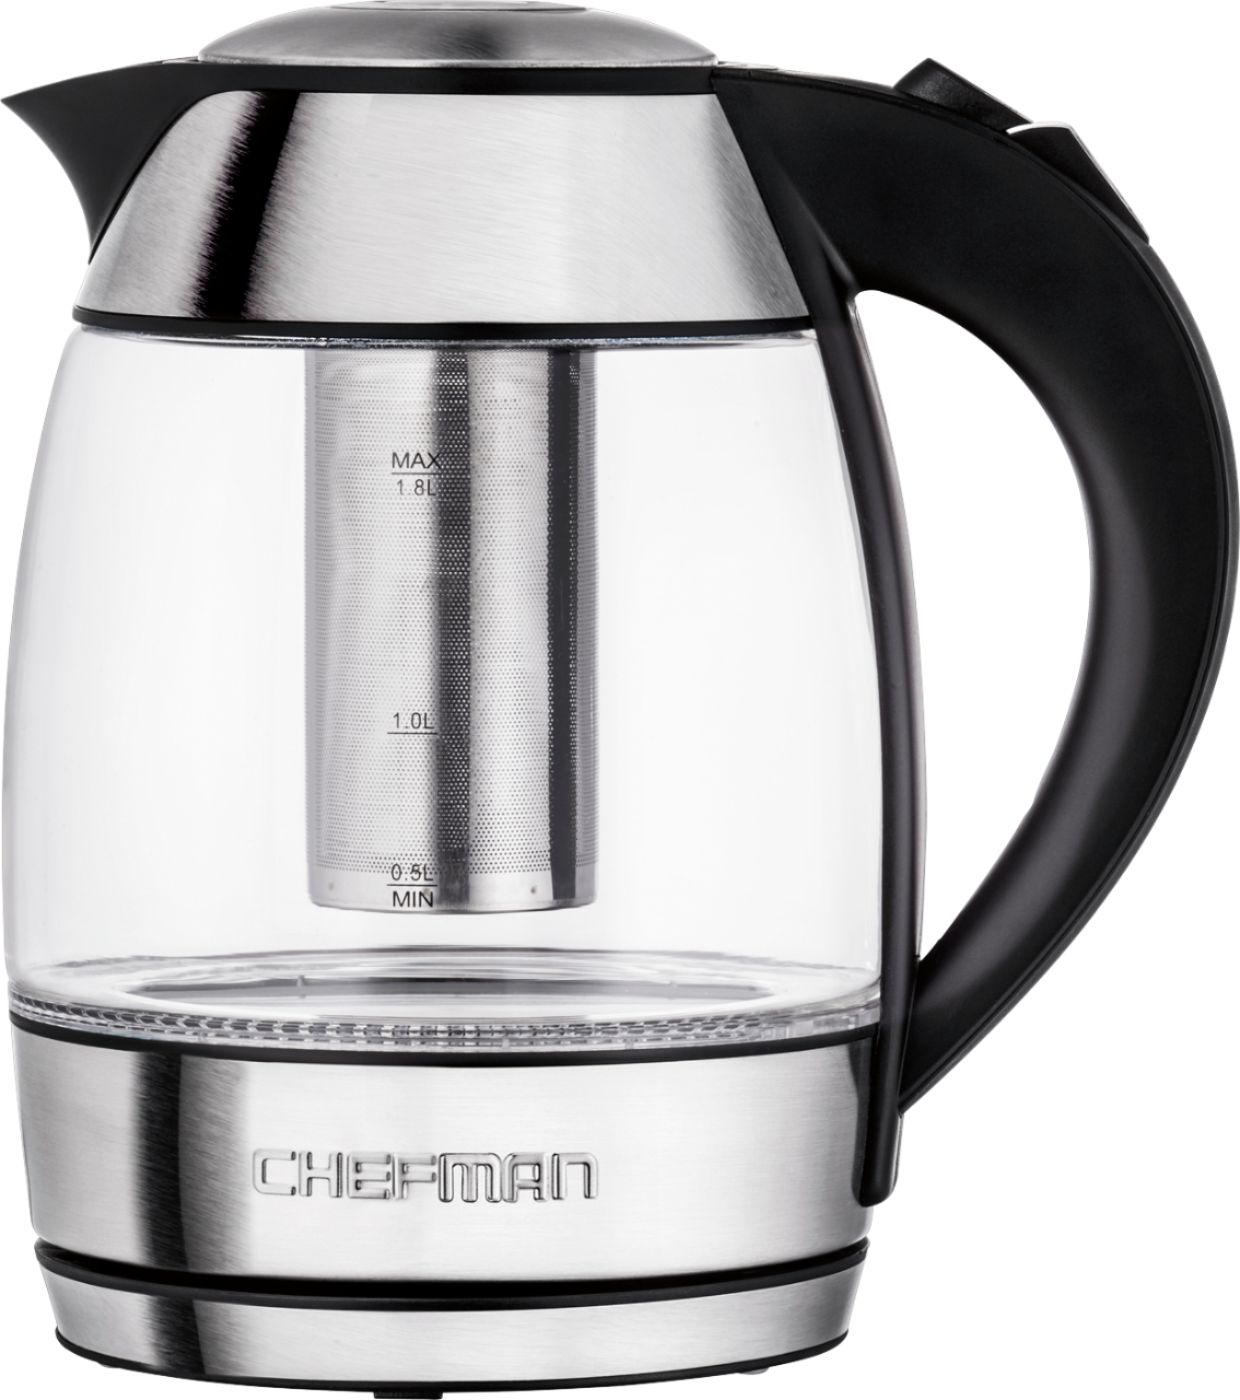 Best Buy: Chefman 1.8L Electric Kettle Stainless steel RJ11-17-TI